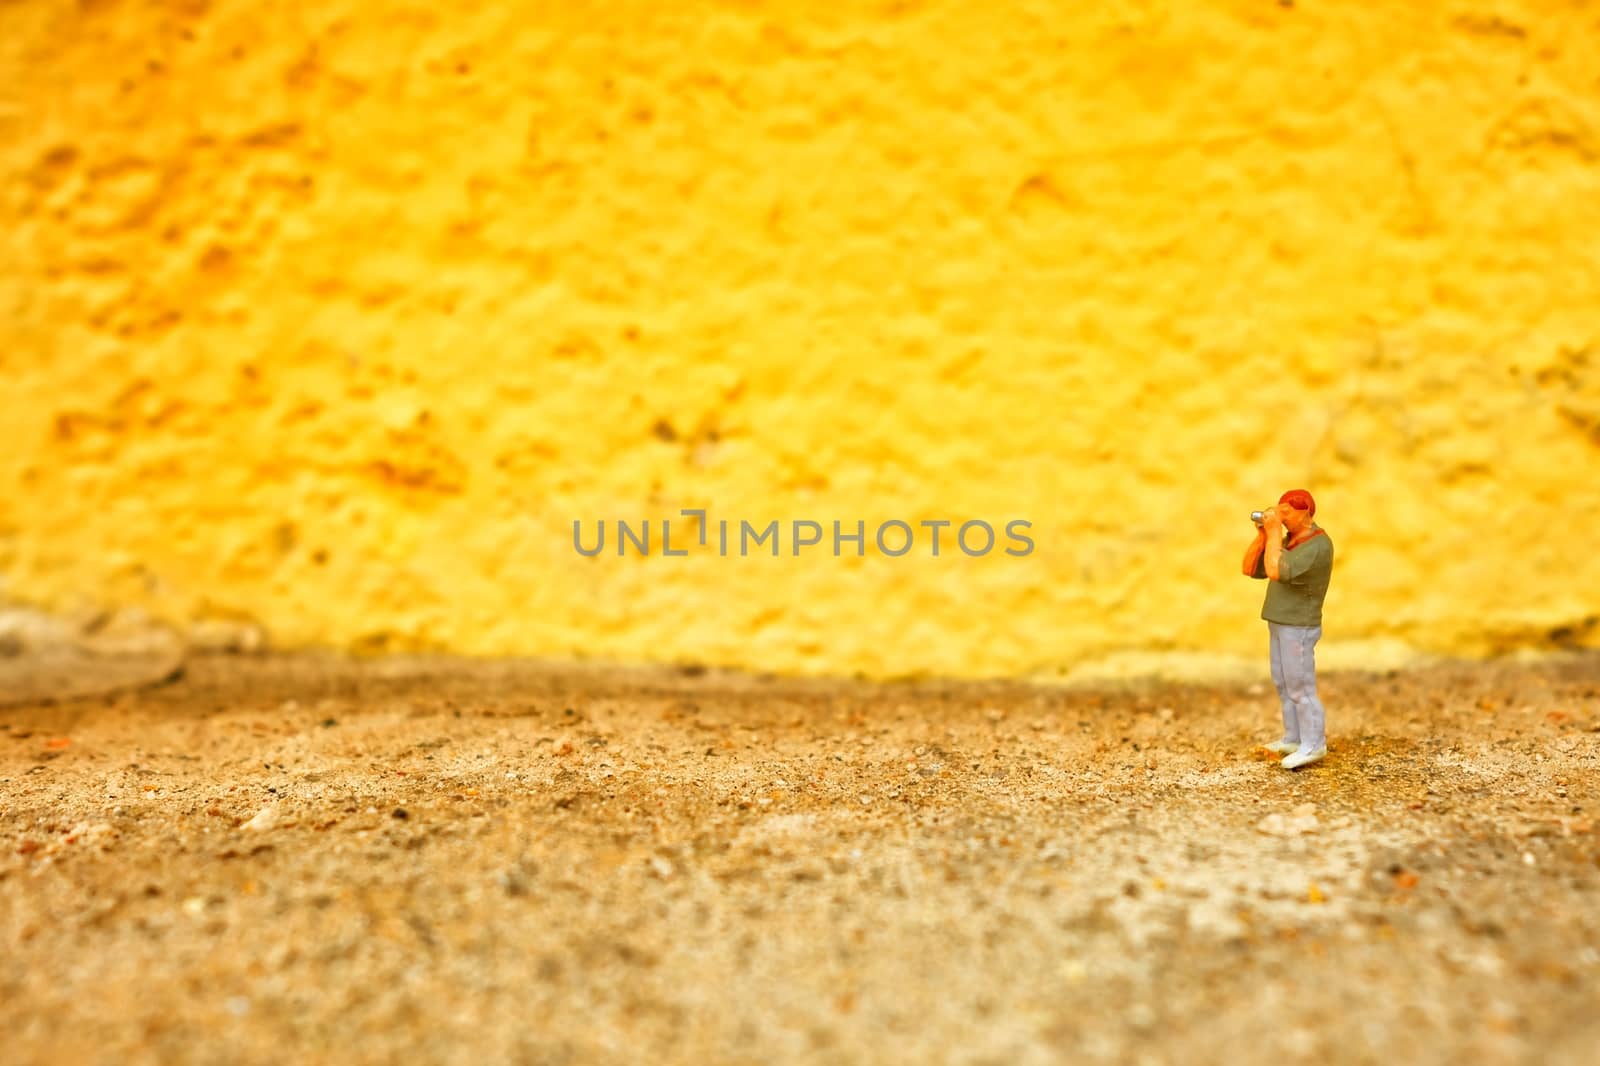 Miniature Figure Photographer with Yellow Painted Concrete Wall Background.